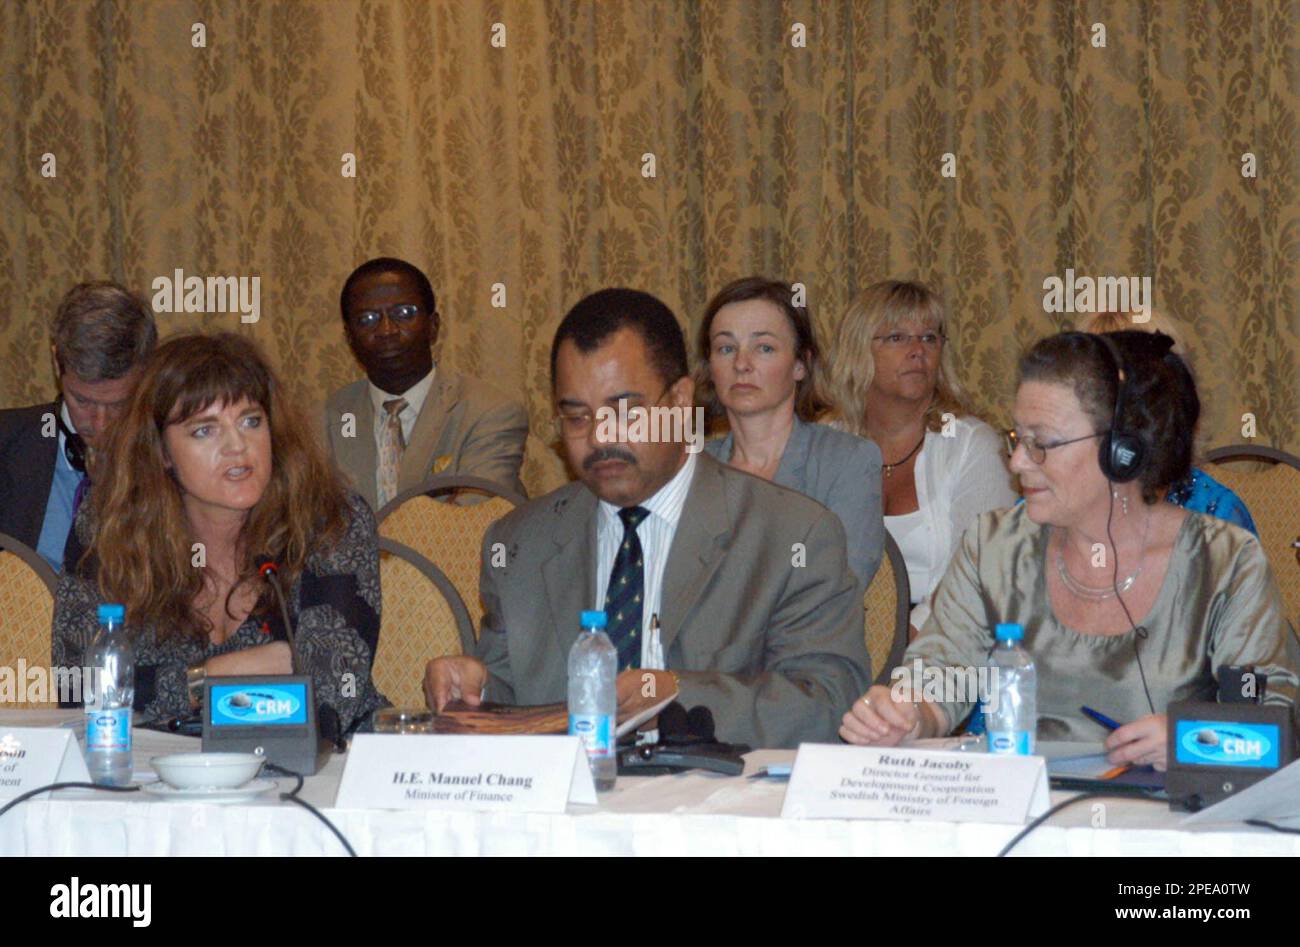 Left to right, Norwegian Minister of International Development, Hilde Frafjord Johnson, Mozambican Finance Minister, Manuel Chang and Ruth Jacoby, Director General of Foreign Afairs, Sweden during a meeting in Maputo, Tuesday March 22, 2005. Johnson and Jacoby are in the country with prominent senior officials from the United Kingdom and the World Bank for meetings with Mozambican authorities, the UN, donors and civil society representatives to co-ordinate aid and to align it more closely with partner countries' priorities. The starting point of discussions will be the organisation of HIV/AIDS Stock Photo